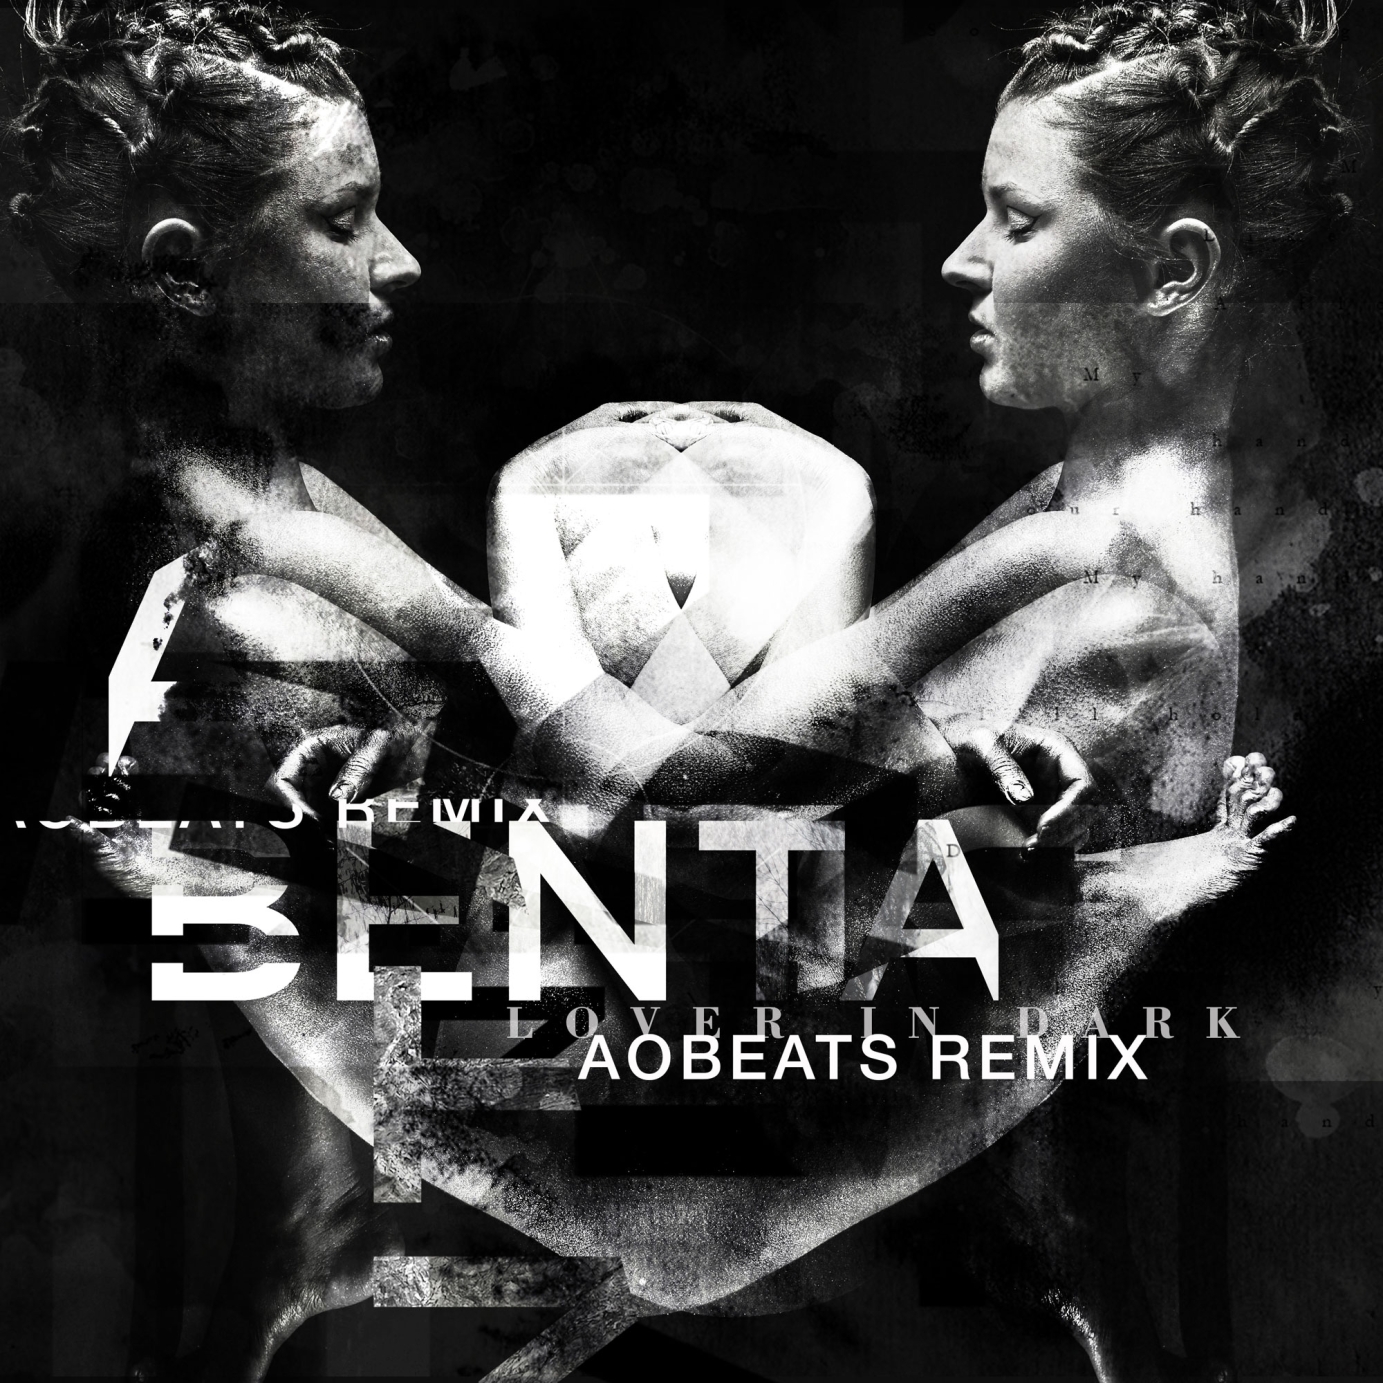 Creative direction for Benta by seanms